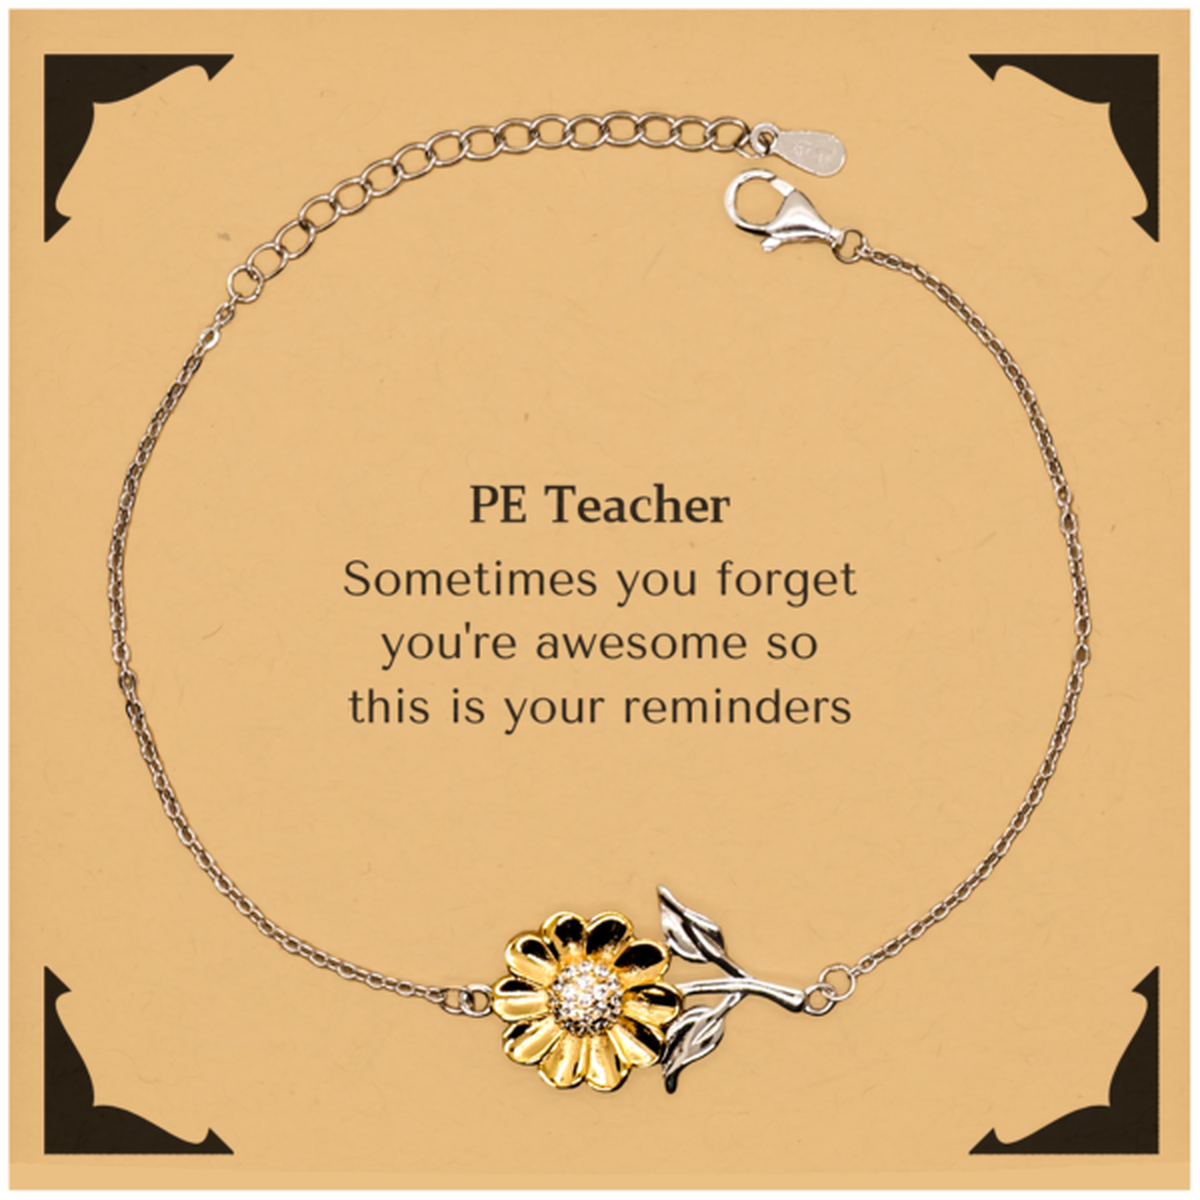 Sentimental PE Teacher Sunflower Bracelet, PE Teacher Sometimes you forget you're awesome so this is your reminders, Graduation Christmas Birthday Gifts for PE Teacher, Men, Women, Coworkers